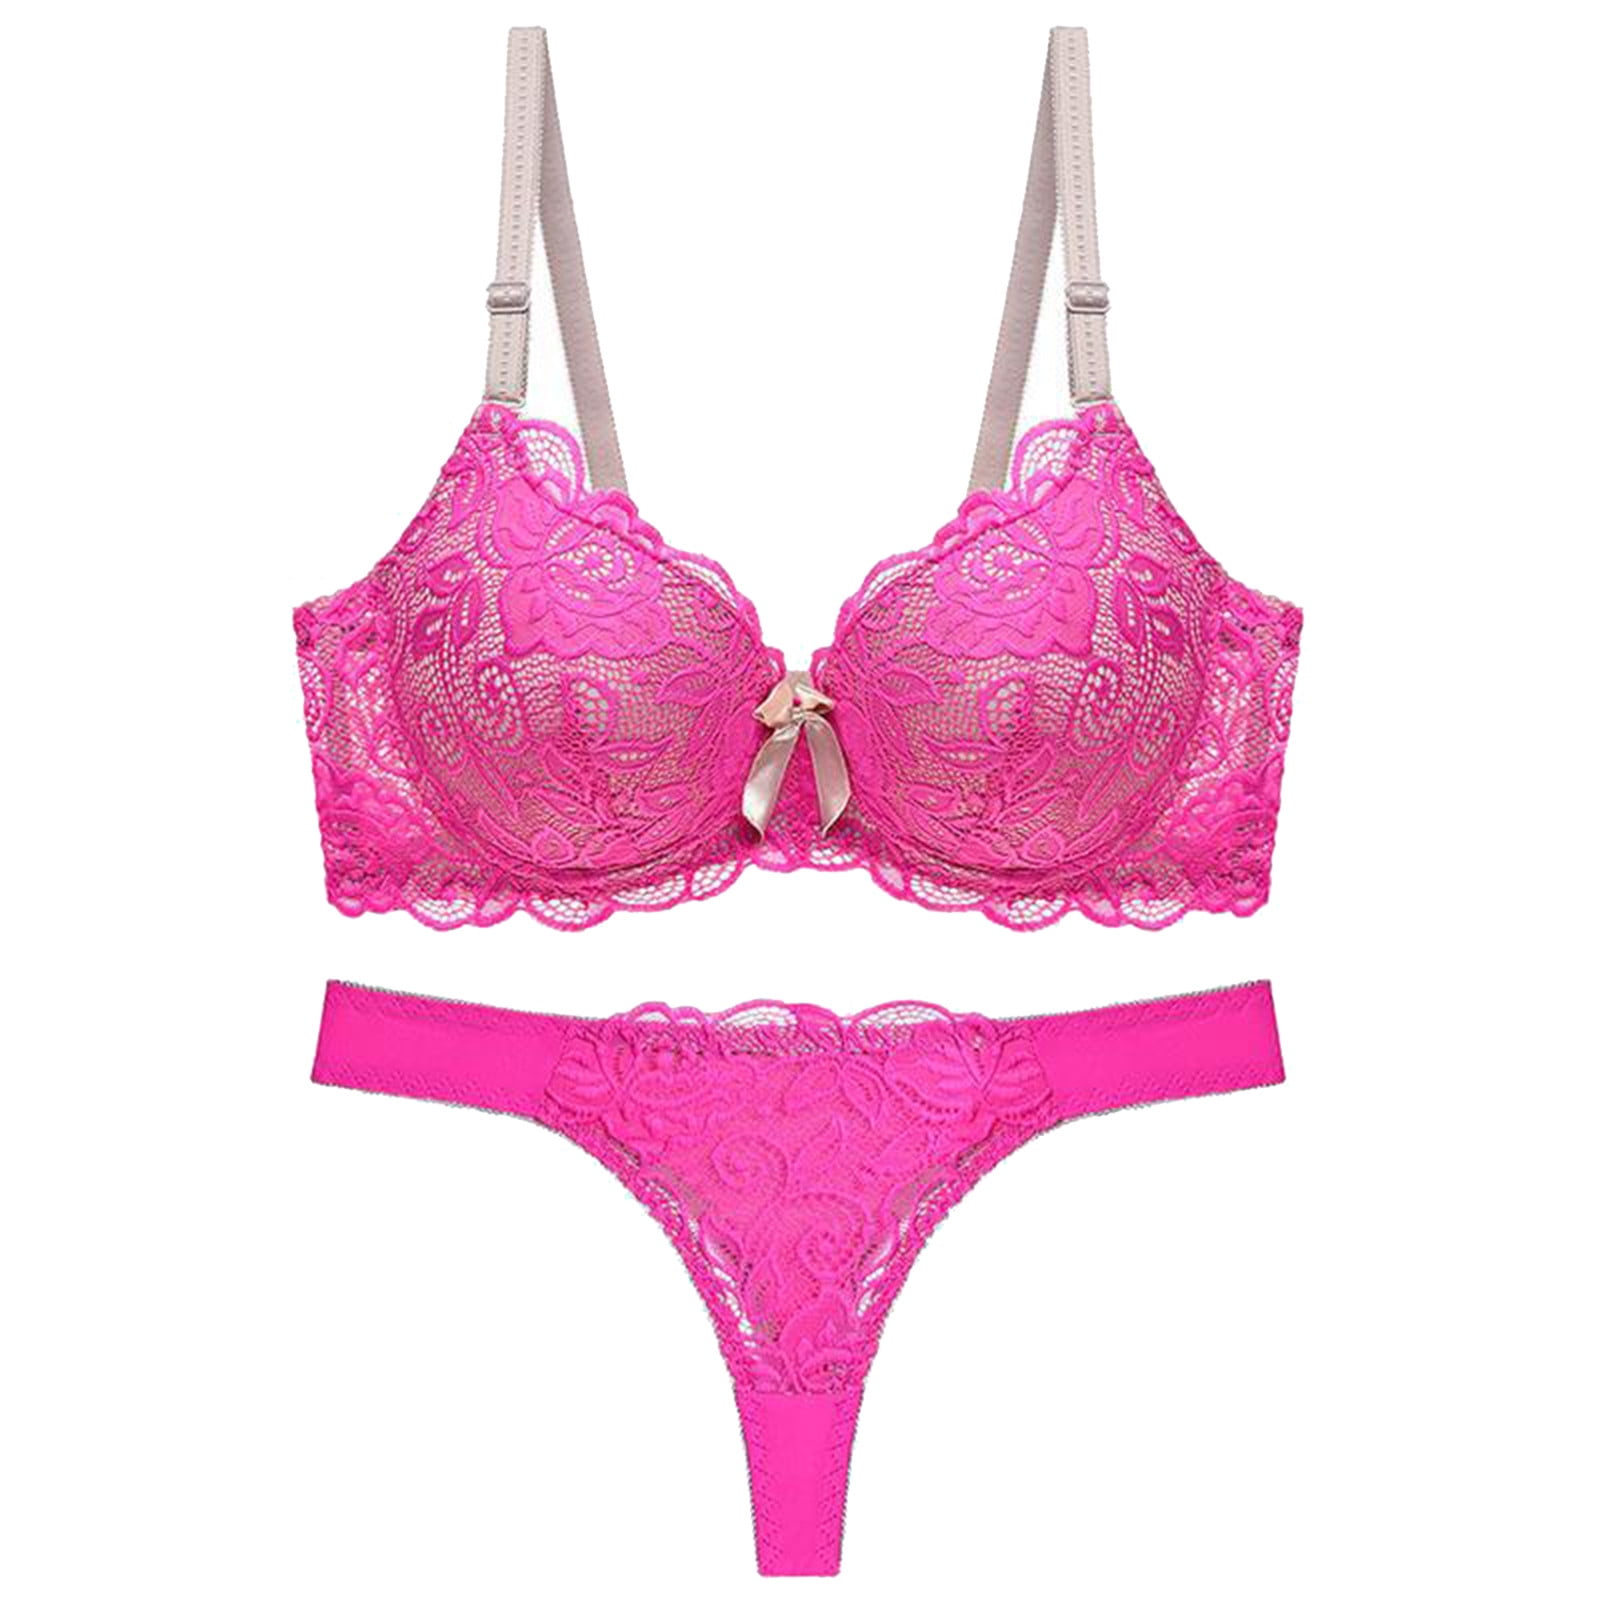 Pink Rhinestone Non Wired Bikini Sets With Garters And Push Up Bra Plus  Size Comfort Panty Lingerie By A Top Brand Q0705 From Sihuai03, $11.52